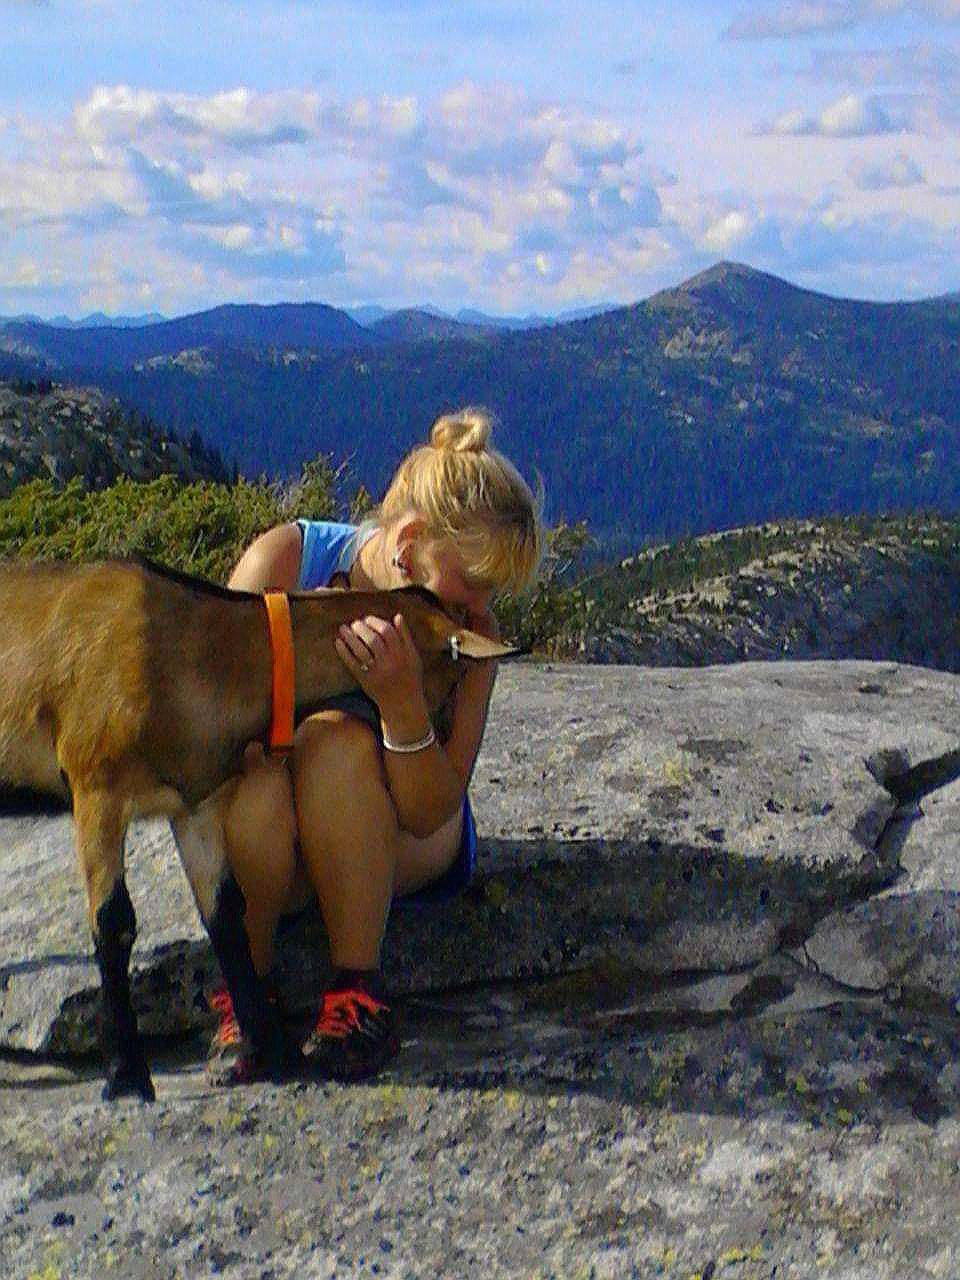 Tank and I celebrate reaching the top of West Fork Mountain with a snuggle.